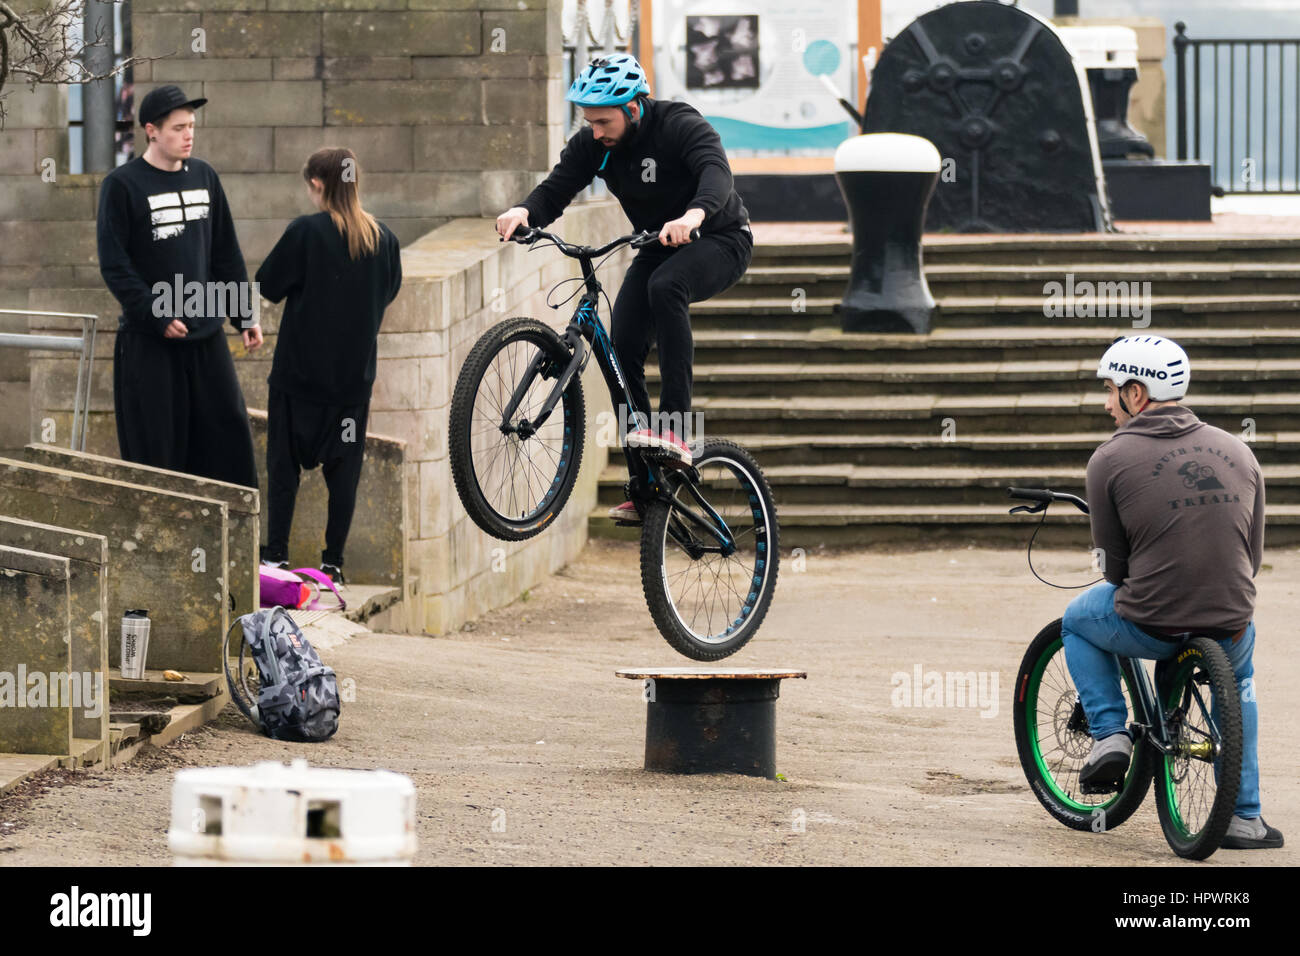 Cardiff, Wales, UK - February 18 2017: Bike riders performing tricks on street furniture. Young men make jumps for fun, with friends standing around Stock Photo